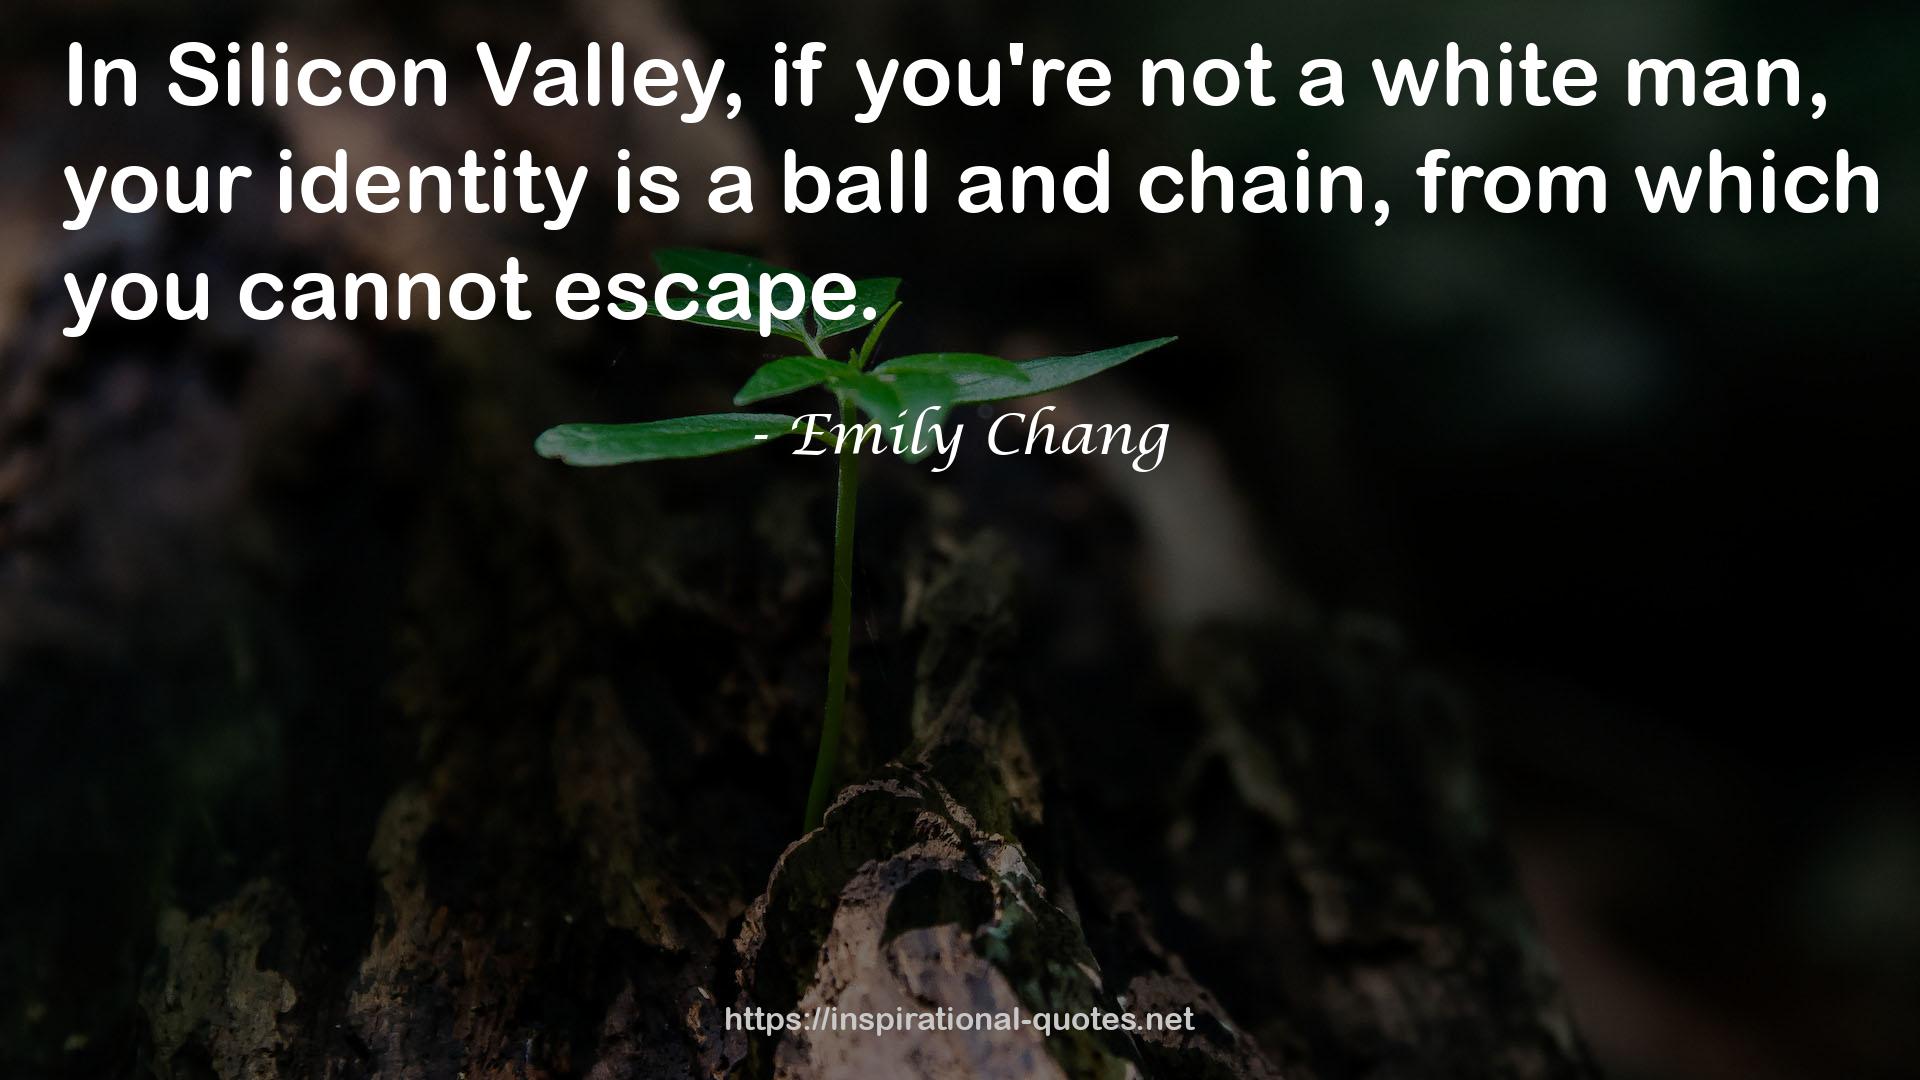 Emily Chang QUOTES